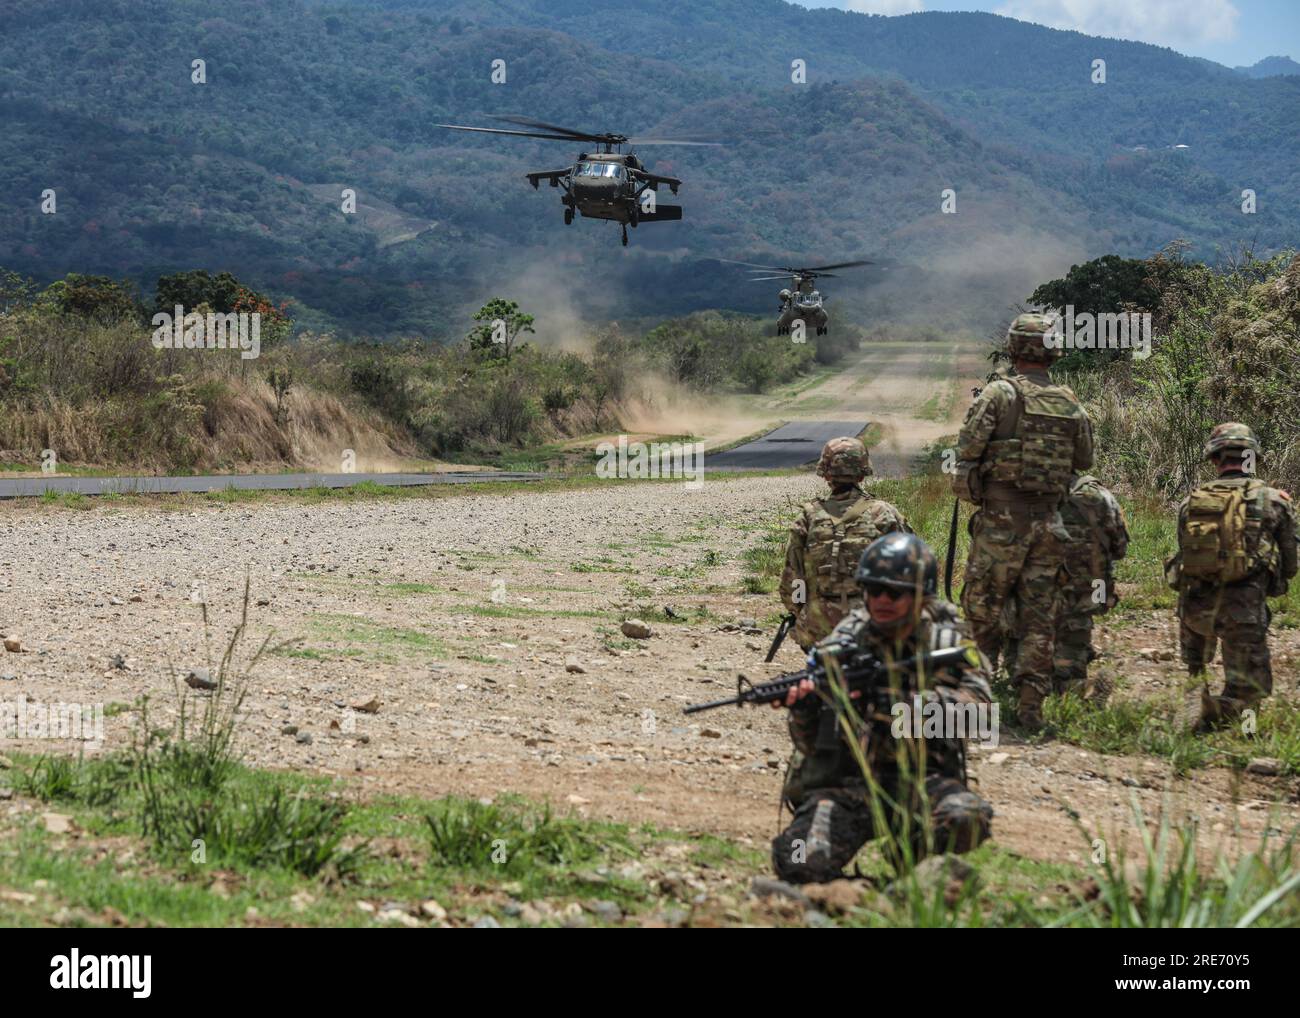 Soldiers with the Guatemalan army, 7th Special Forces Group (Airborne) and the Arkansas Army National Guard pull security at the landing zone while awaiting exfiltration, during CENTAM Guardian 23 in El Cerinal, Guatemala on March 23, 2023.  CG23 is an annual Army-led combined, joint, interagency, multi-national partnership-building exercise designed to build capacity, capabilities and interoperability with Central American partner nations. (U.S. Army photo by Sgt. 1st Class Iman Broady-Chin) Stock Photo